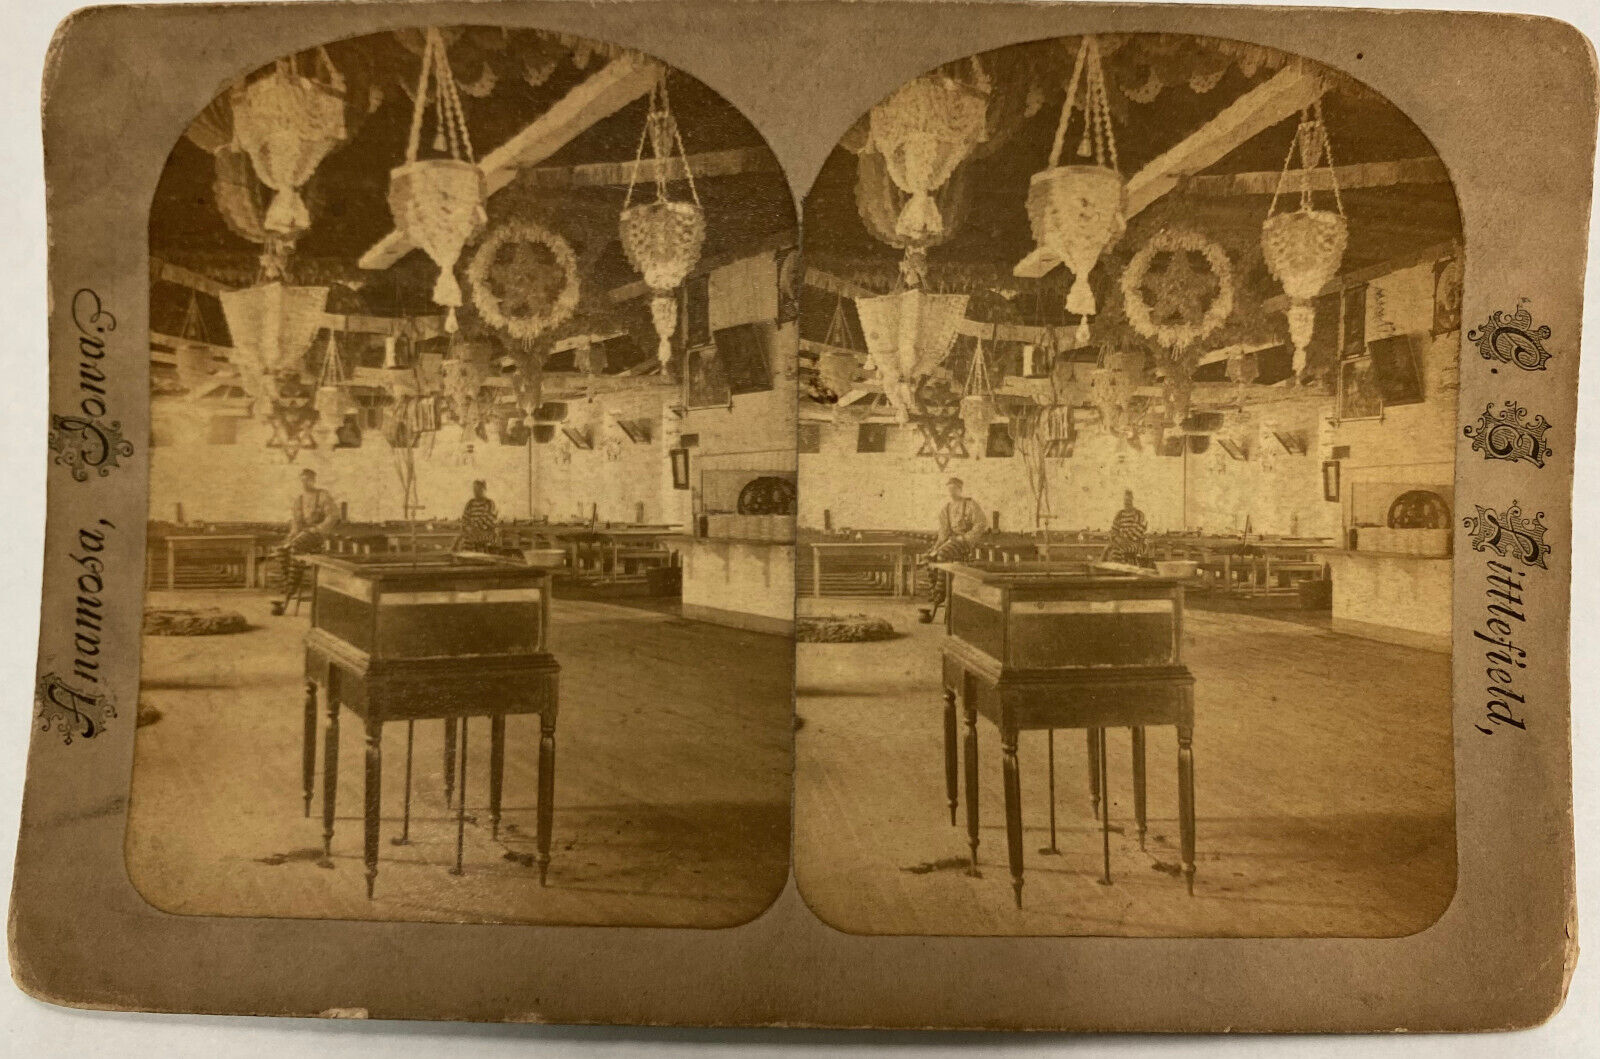 IOWA SV - ANAMOSA STATE PENITENTIARY Littlefield Prison STEREOVIEW Inmate DIning